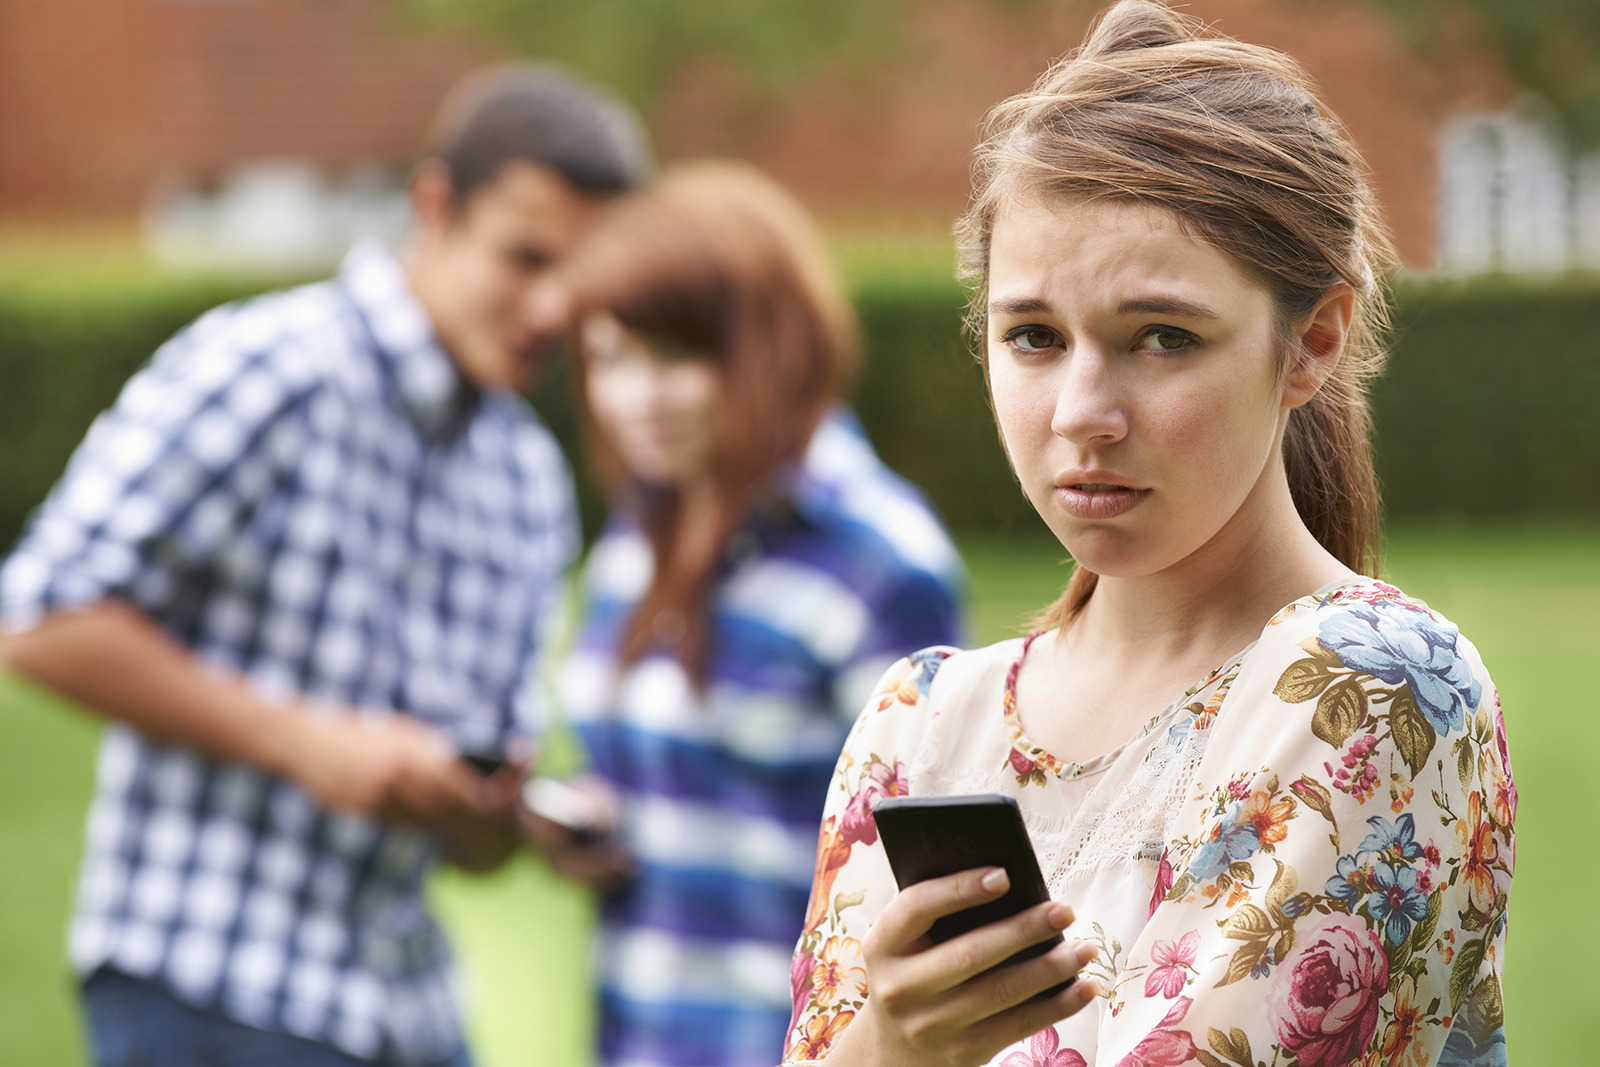 Teenage Girl Victim Of Bullying By Text Messaging